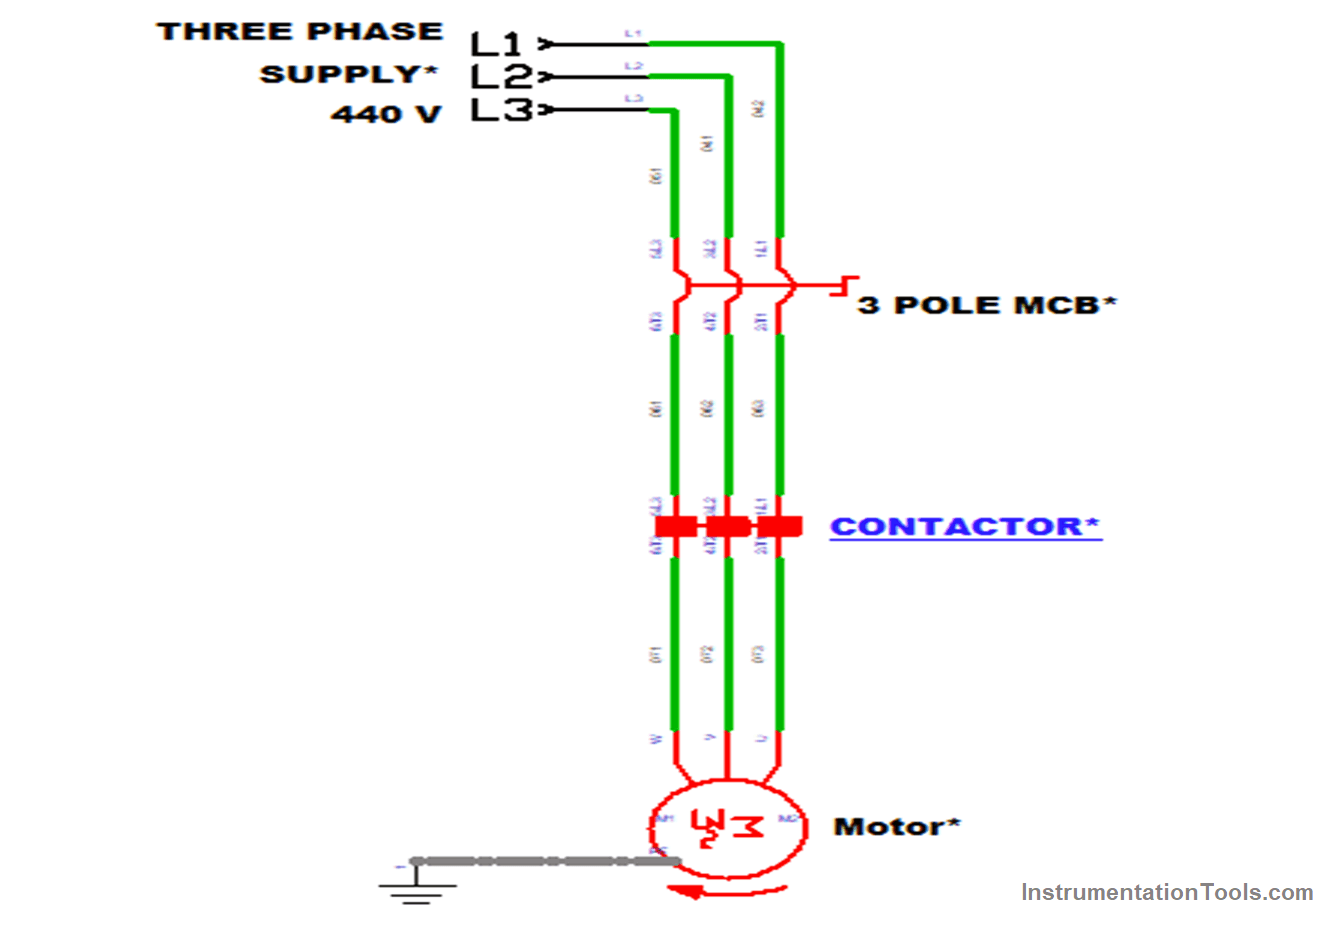 Automatic Motor Control using Timer